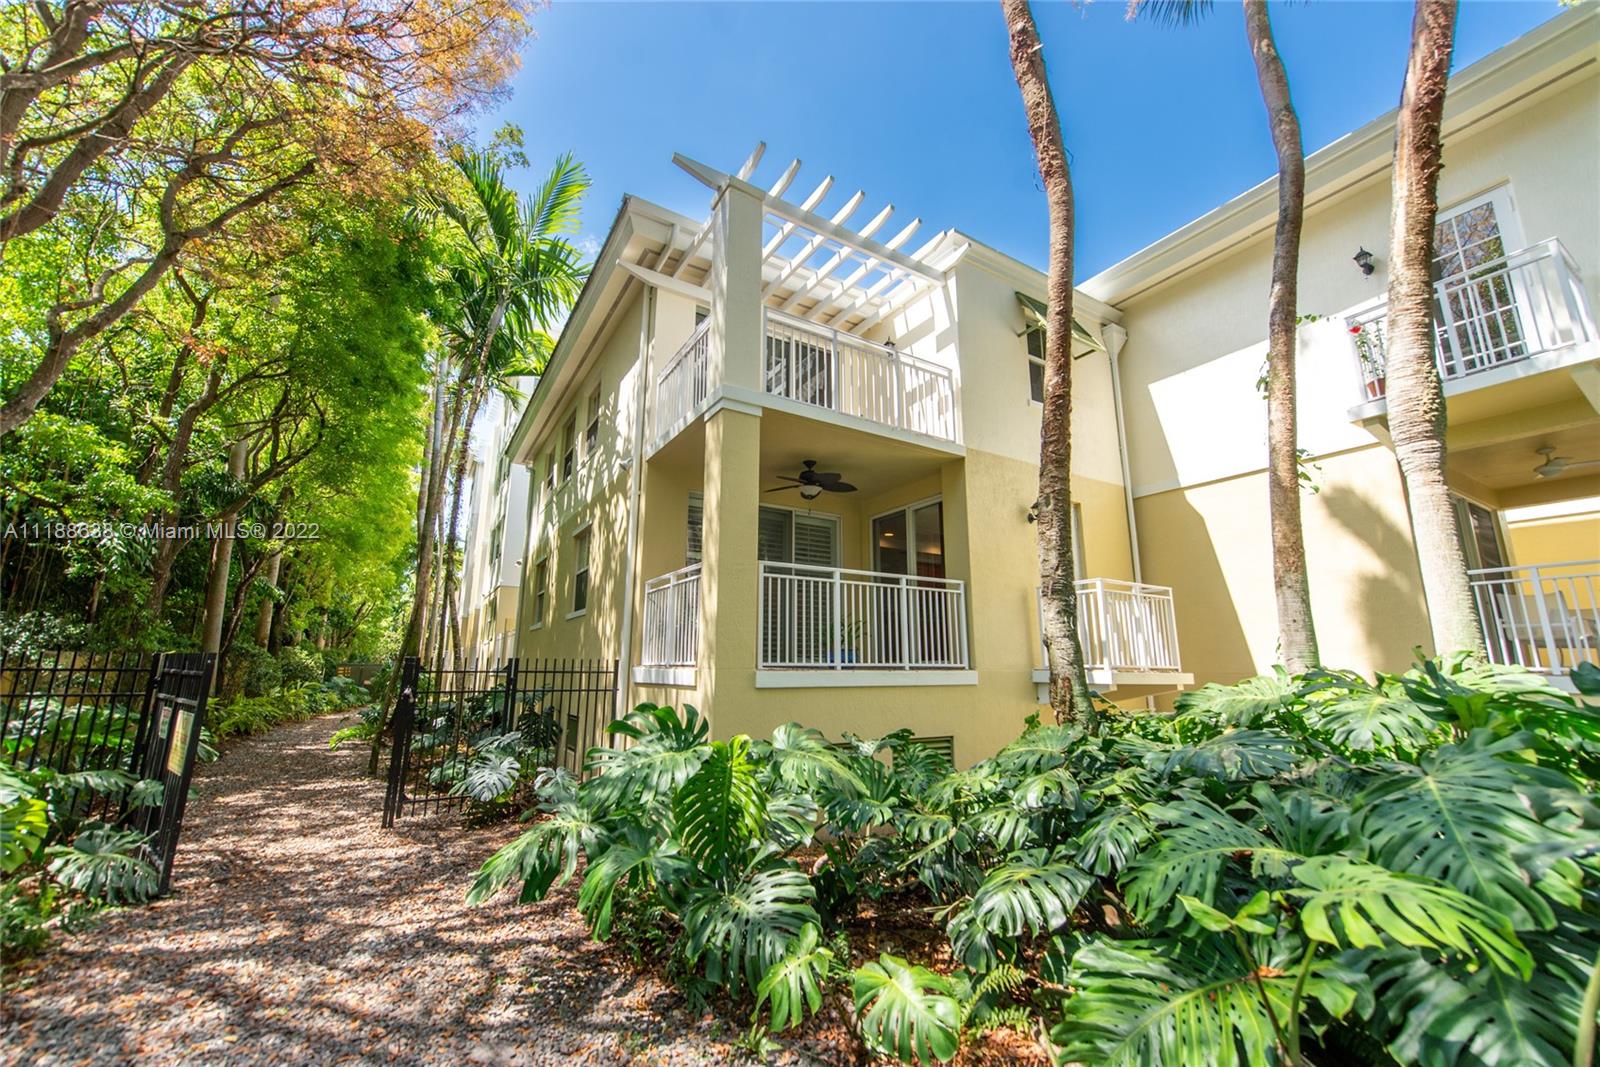 Great opportunity to live in the heart of Pinecrest! This rarely available ground floor & corner 2-story unit is located in the highly desirable Reserve of Pinecrest. This serene 3 bedroom/ 3 bathroom offers a great layout & two balconies with lovely treetop views.  Updated eat-in kitchen, wood floors in bedrooms, hurricane impact windows, and lots of storage. 1 bedroom on ground level and Master Bedroom en-suite on 2nd floor. Wonderful amenities include gym, pool, and 2 assigned parking spaces in garage. Located within Pinecrest Elementary school district.